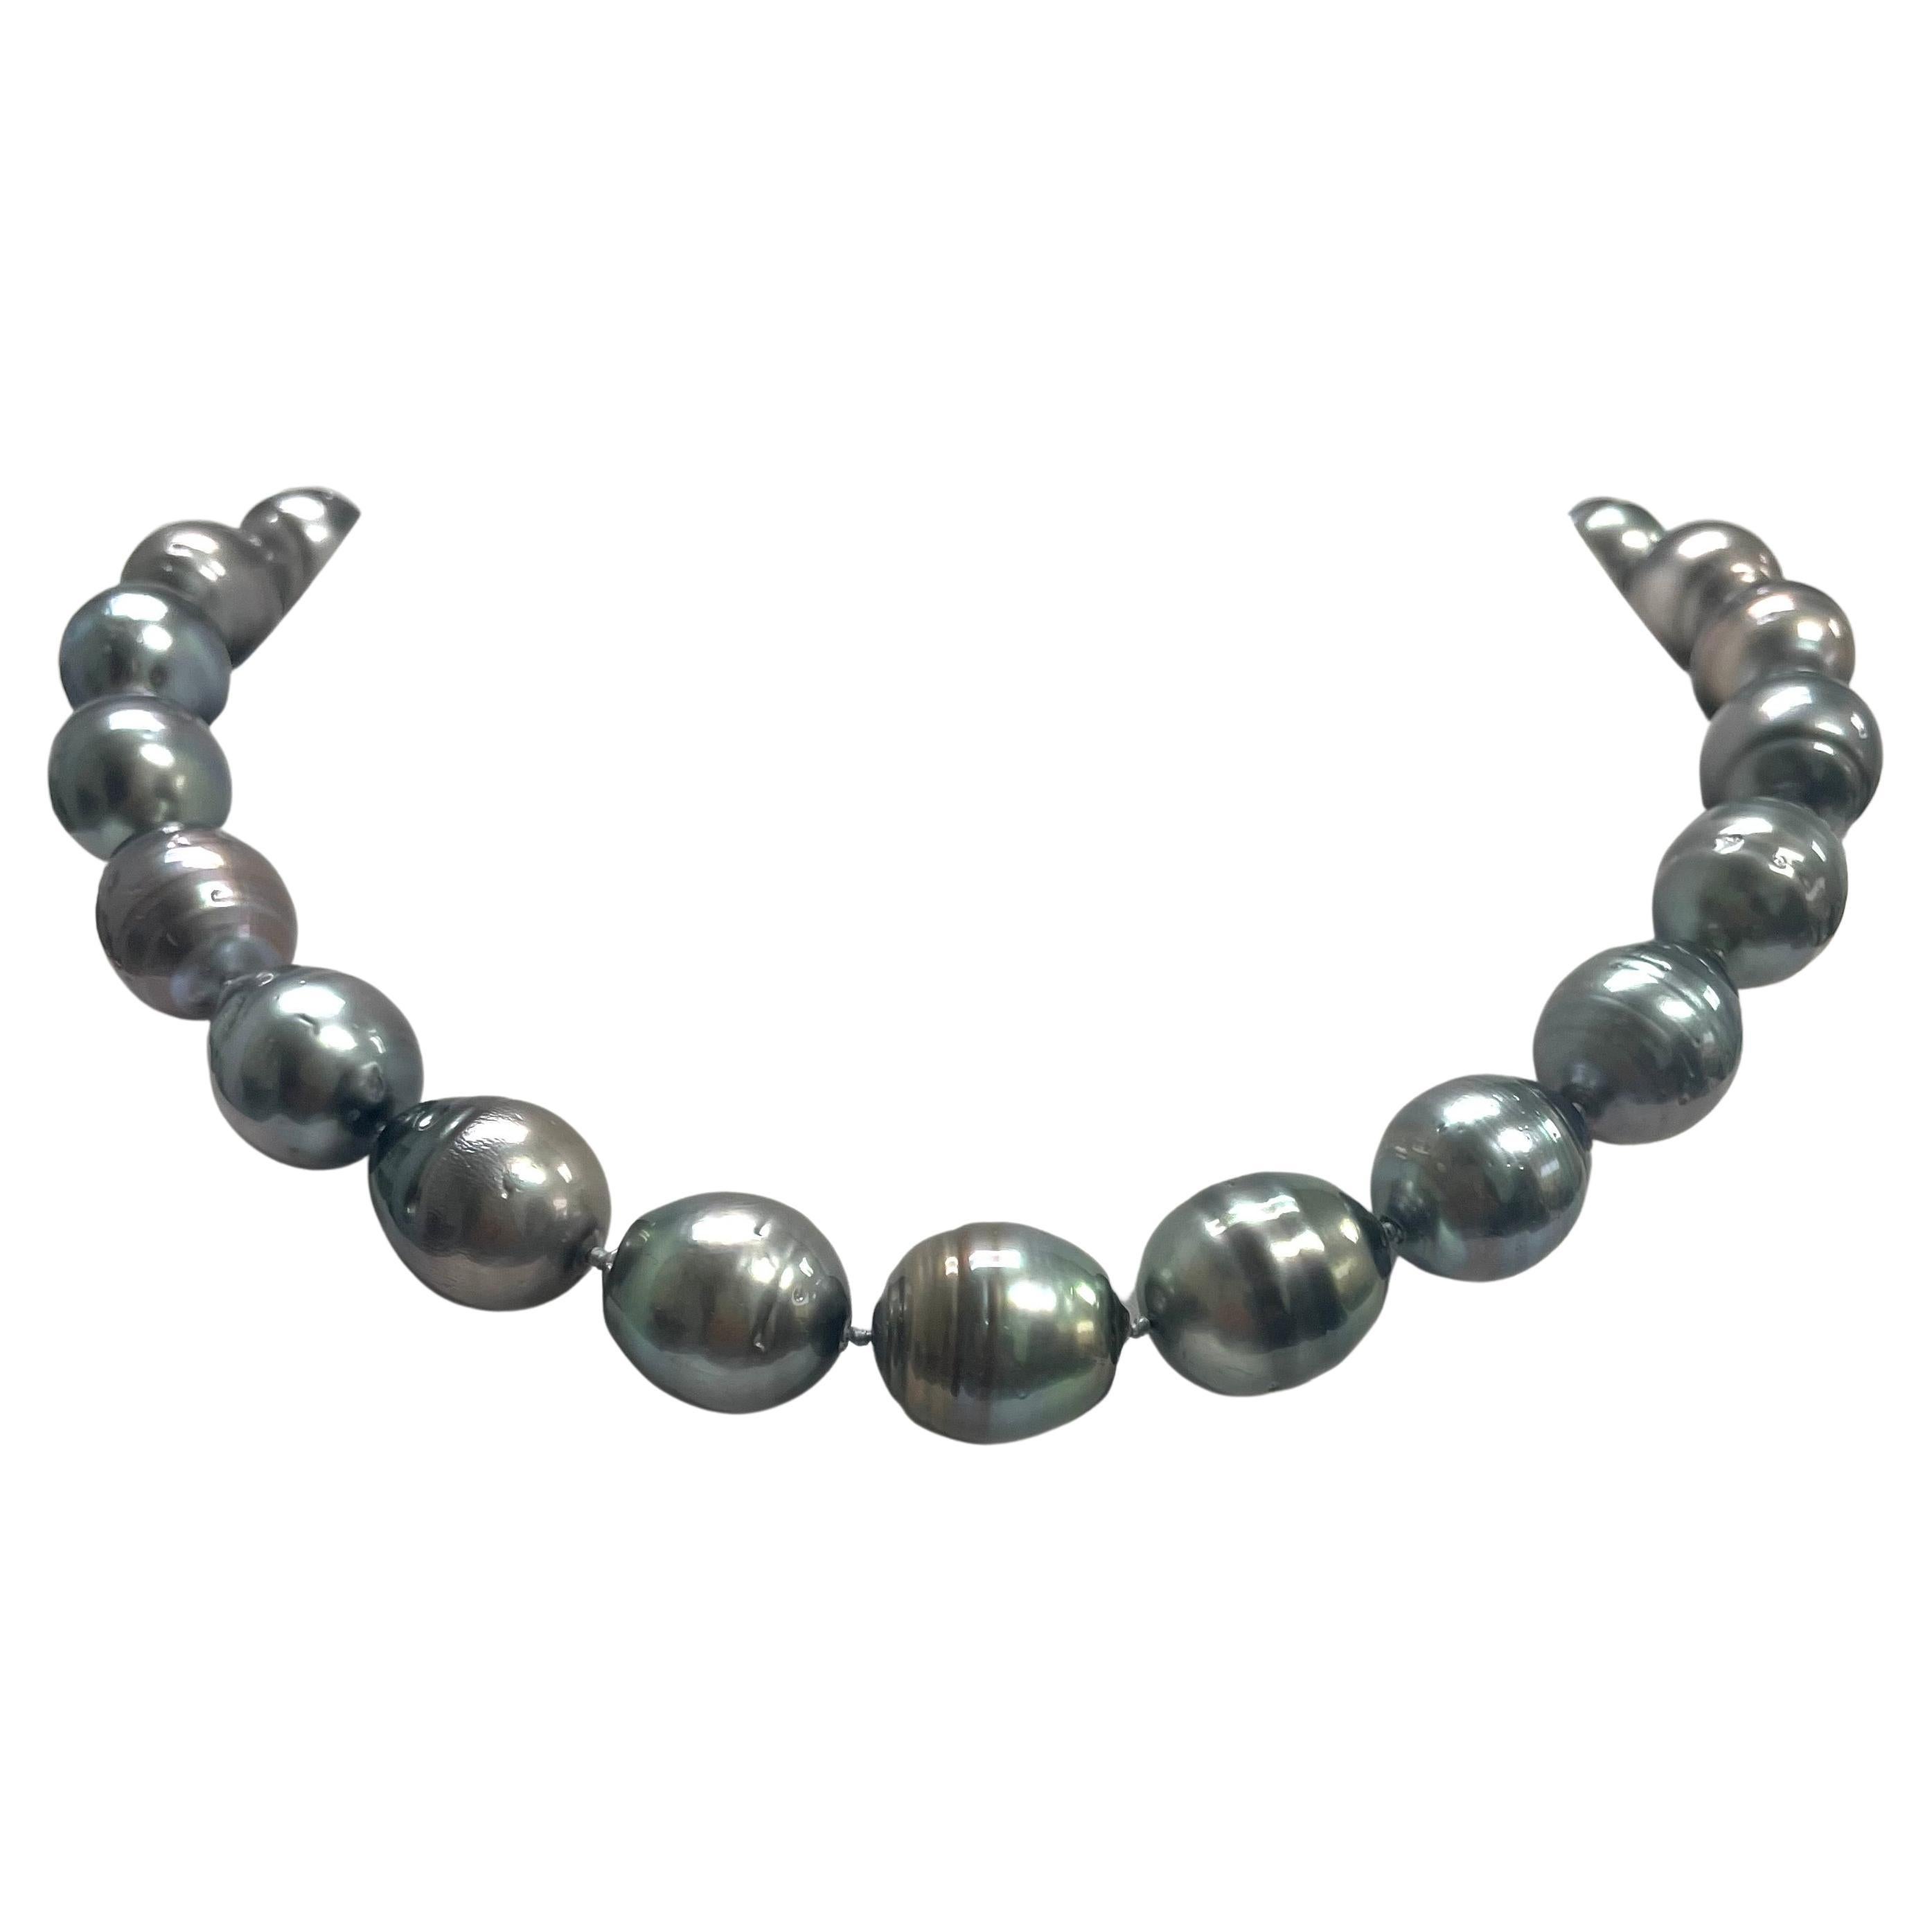 Enormous Gray Tahitian Pearl Necklace